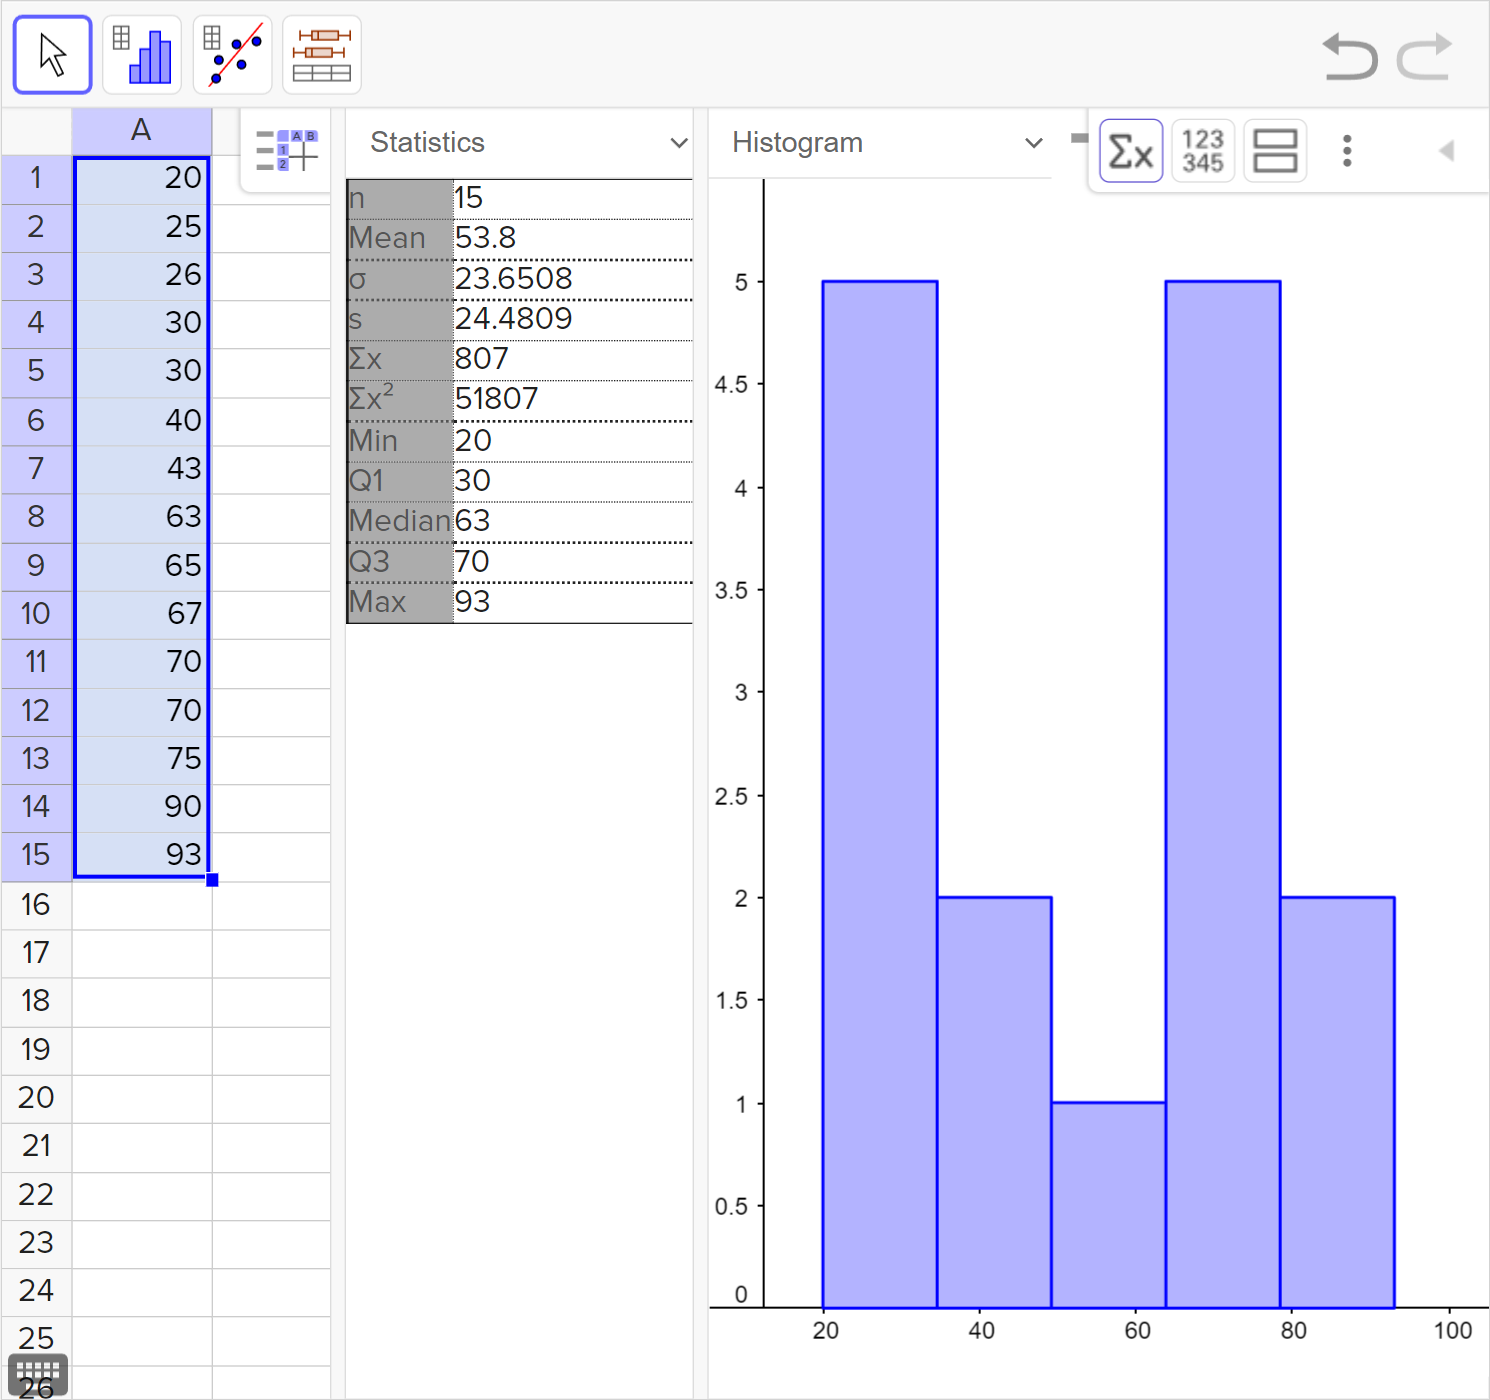 A screenshot of the GeoGebra statistics tool. From left to right, the following are shown: the cells containing 20, 25, 26, 30, 30, 40, 43, 63, 65, 67, 70, 70, 75, 90, and 93 selected, a list of statistical values, and a histogram. Speak to your teacher for more details.